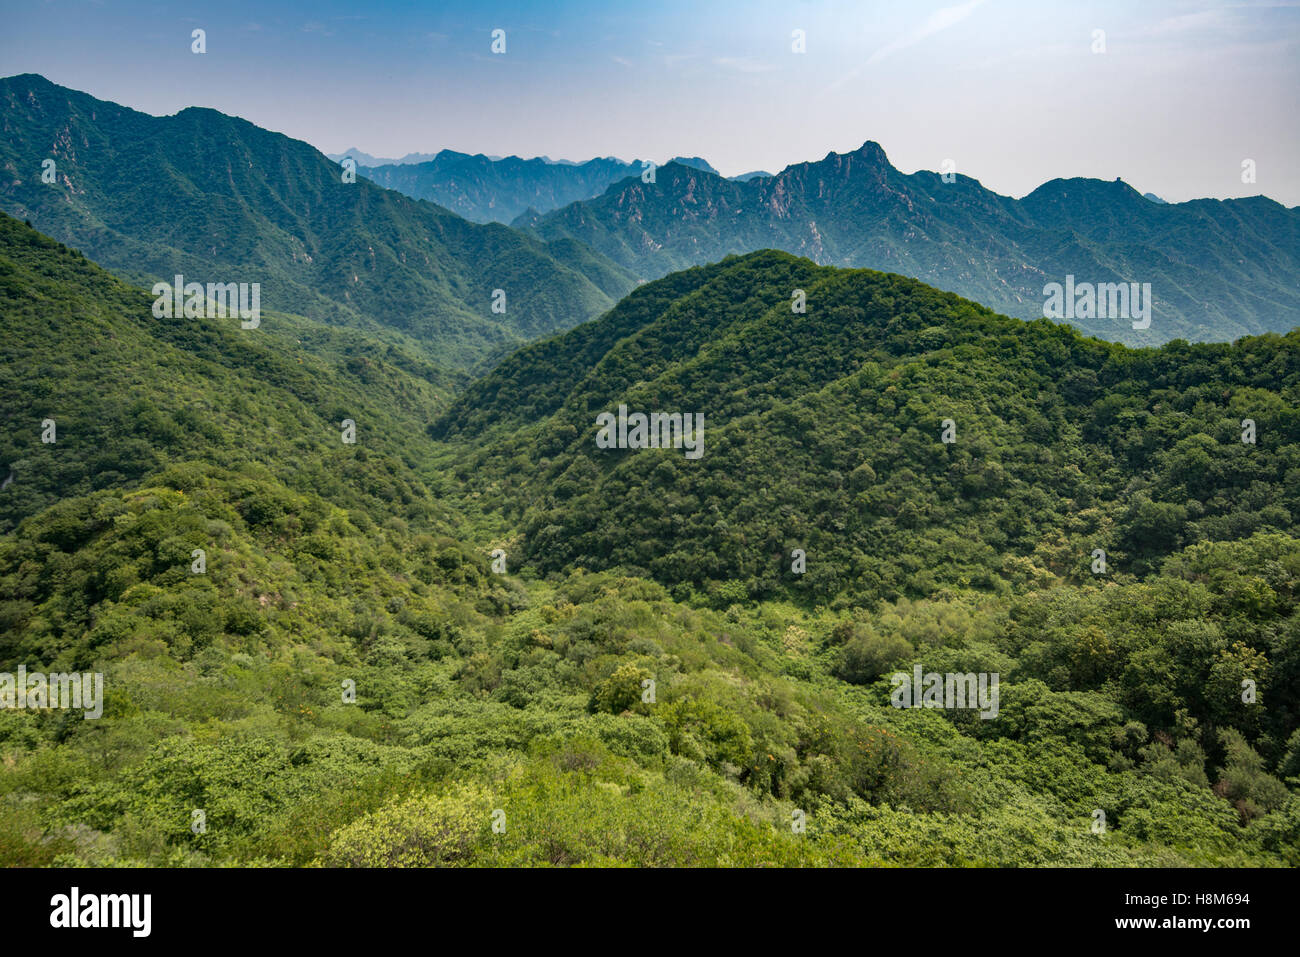 Mutianyu, China - Landscape view of the Great Wall of China mountain range. The wall stretches over 6,000 mountainous kilometers Stock Photo